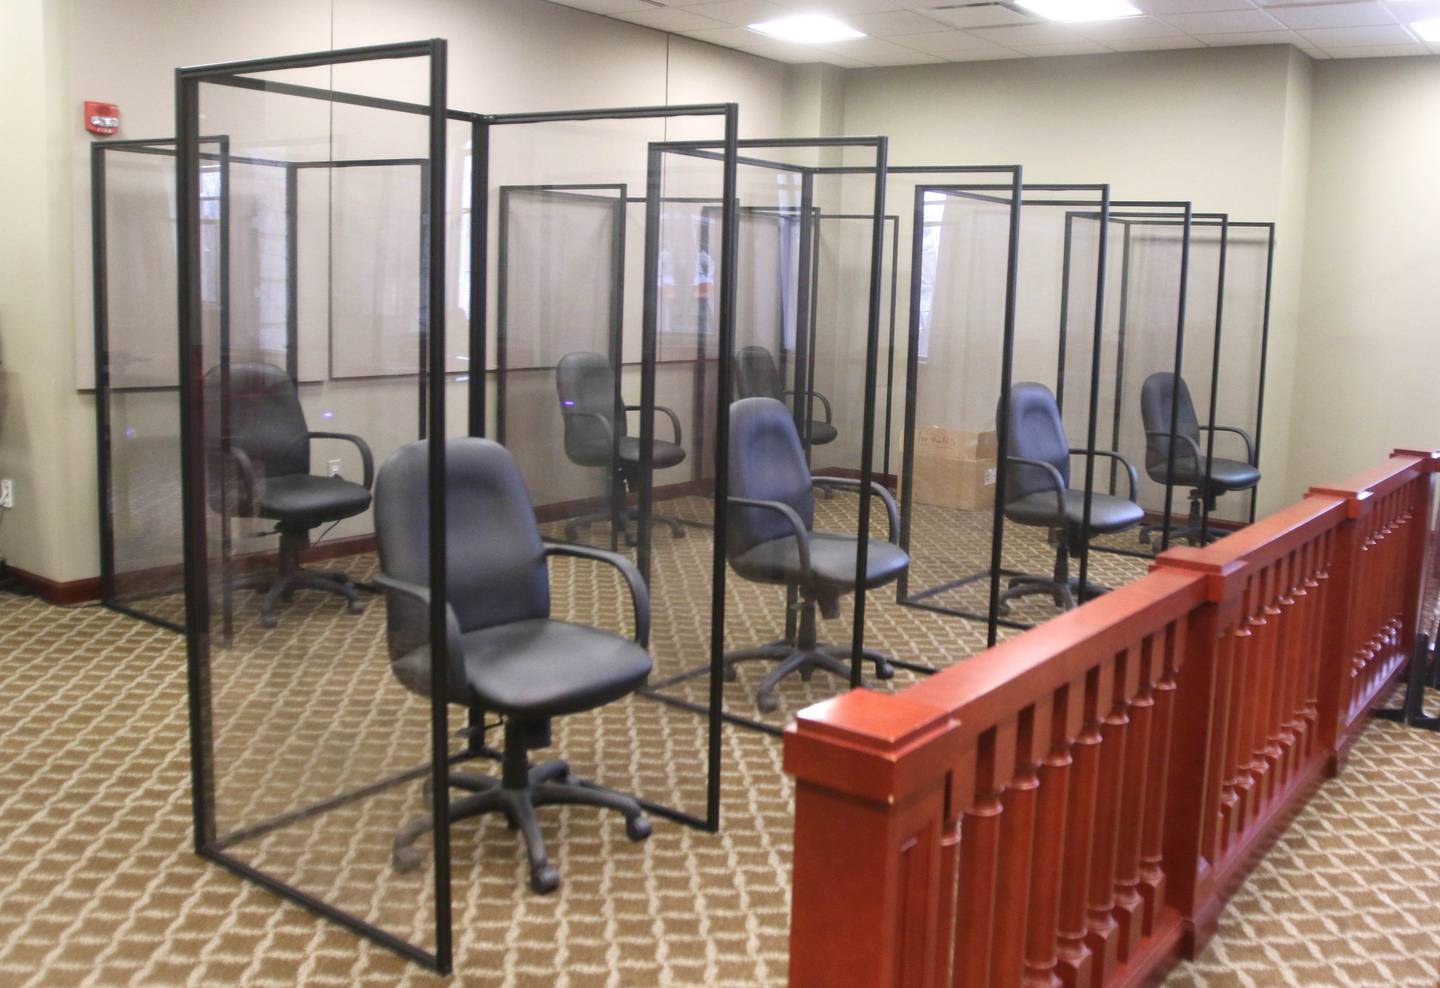 Part of the jury seating area in a courtroom at the DeKalb County Courthouse where each juror will be protected on three sides by plexiglass dividers. The new setup was created using the recommendations of the DeKalb County Health Department to prevent the spread of COVID-19 and includes multiple plexiglass dividers between court members and personal plexiglass booths for each juror.